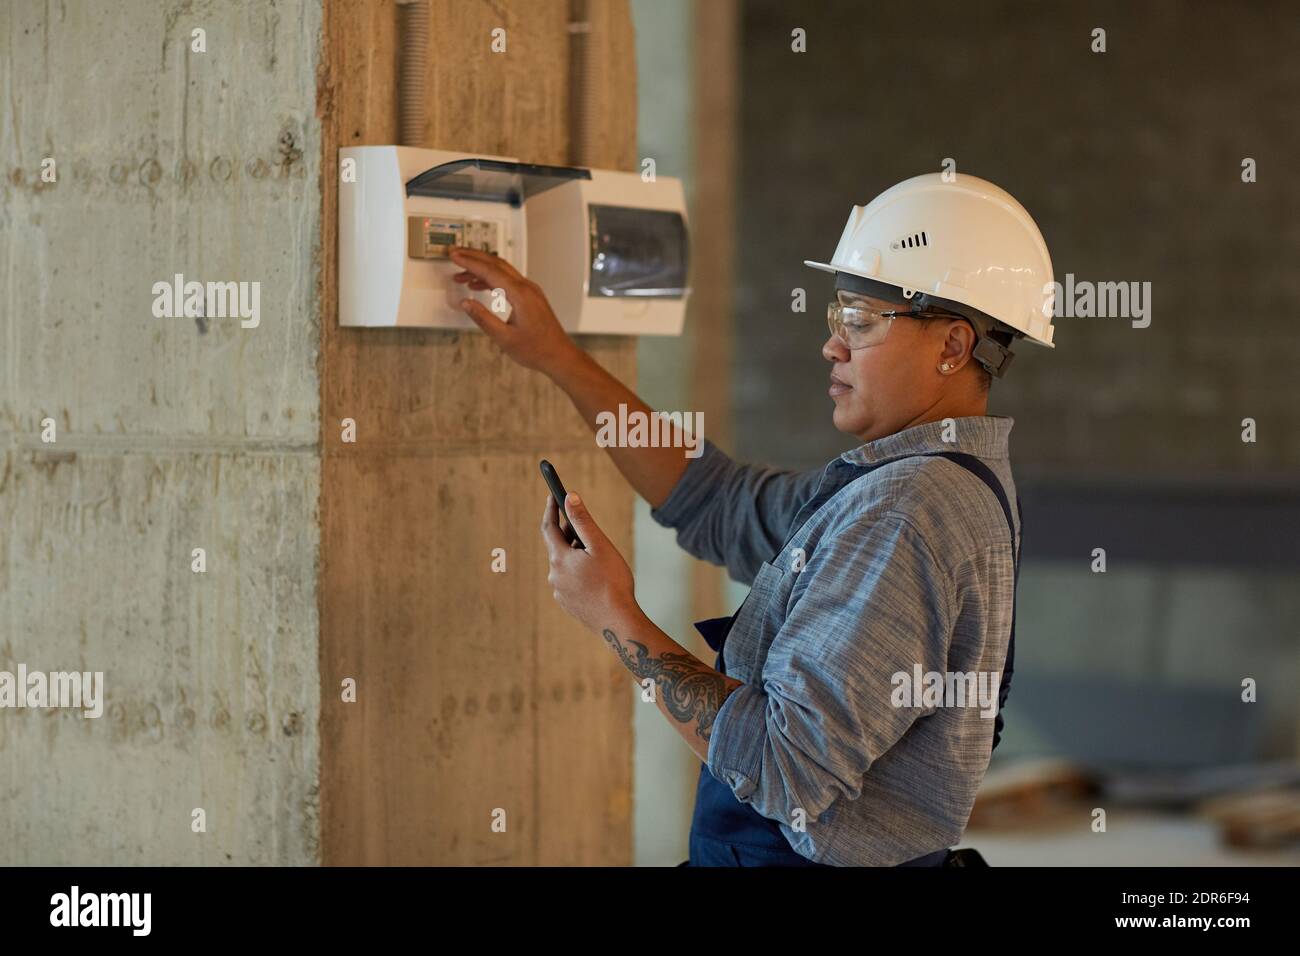 Side view portrait of female worker setting up electricity and using smartphone while working on construction site, copy space Stock Photo